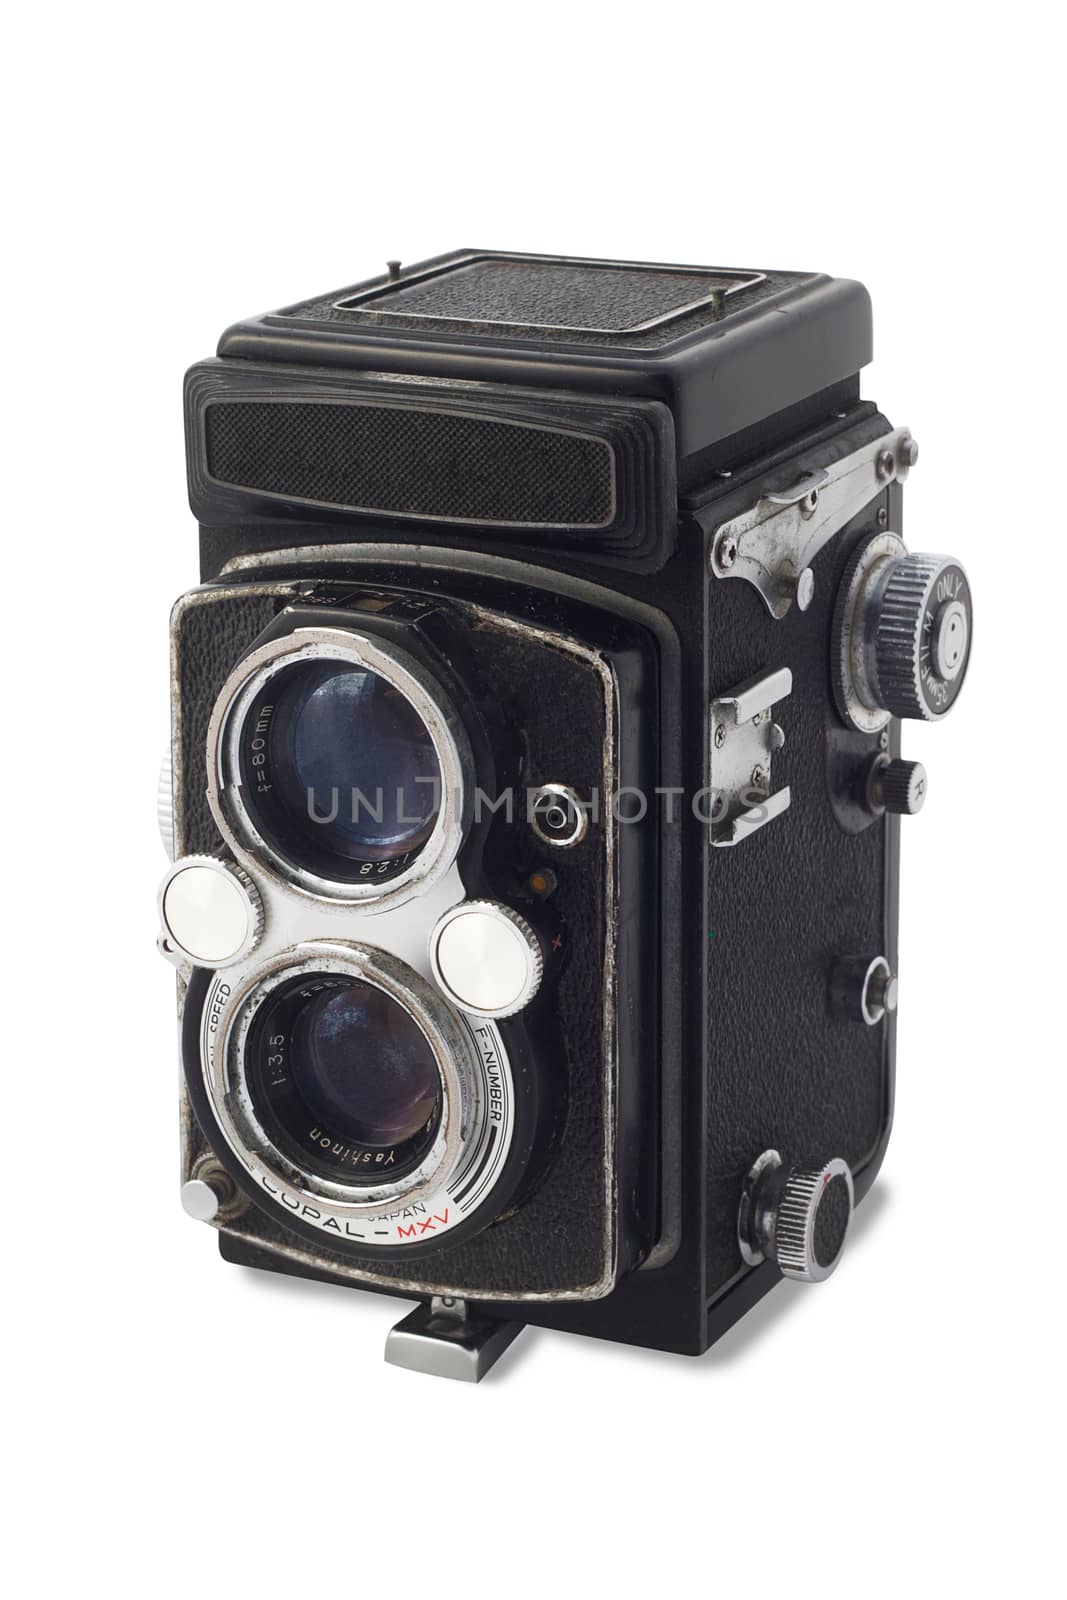 Vintage twin-lens reflex old camera isolated on white background with clipping path by asiandelight